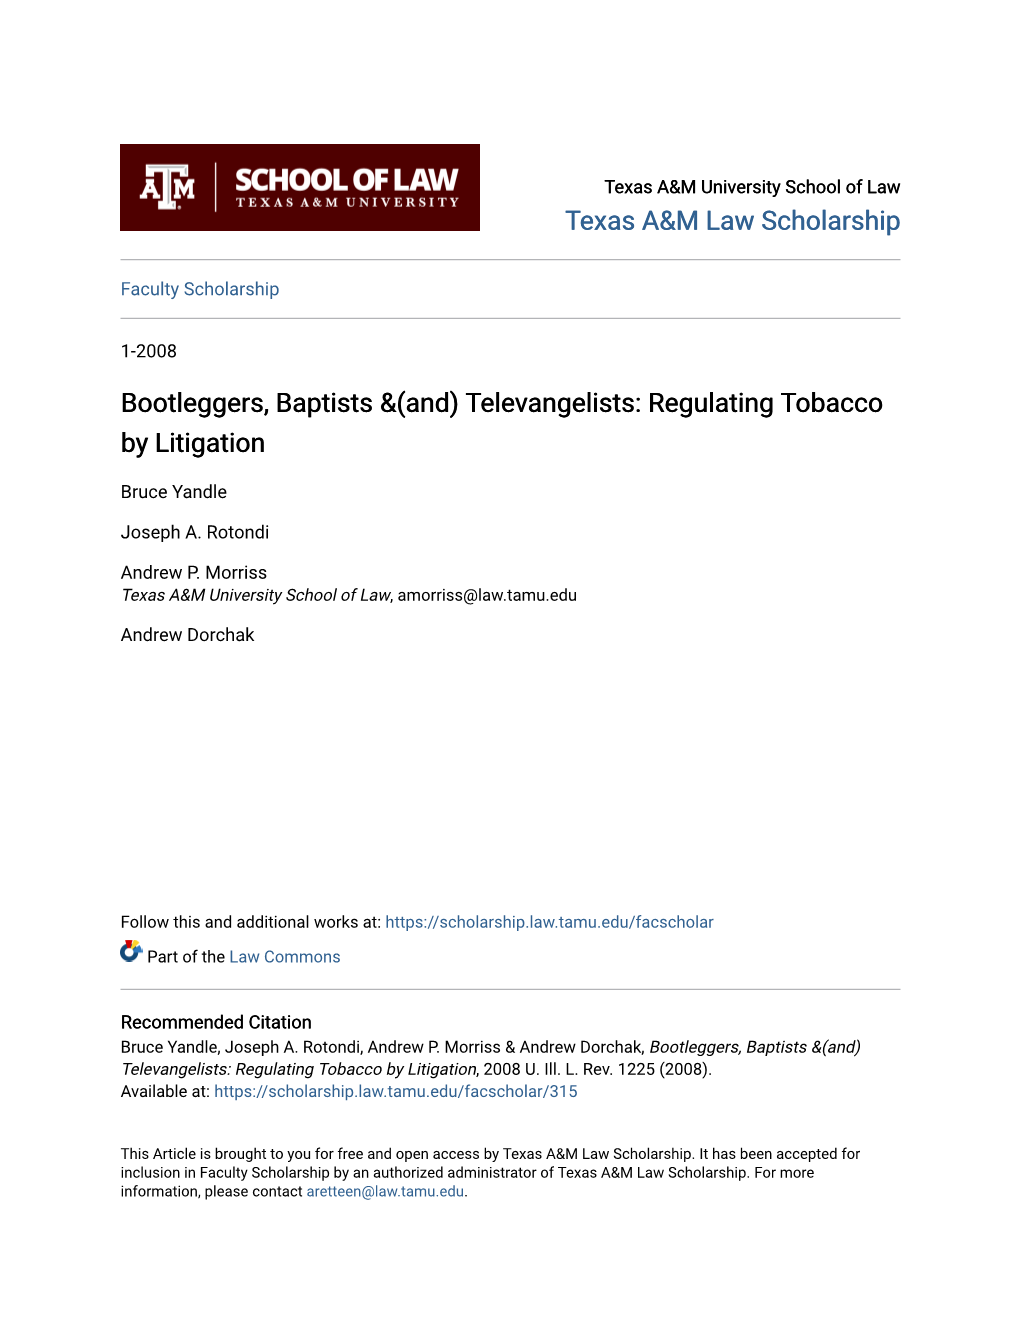 Bootleggers, Baptists &(And) Televangelists: Regulating Tobacco by Litigation